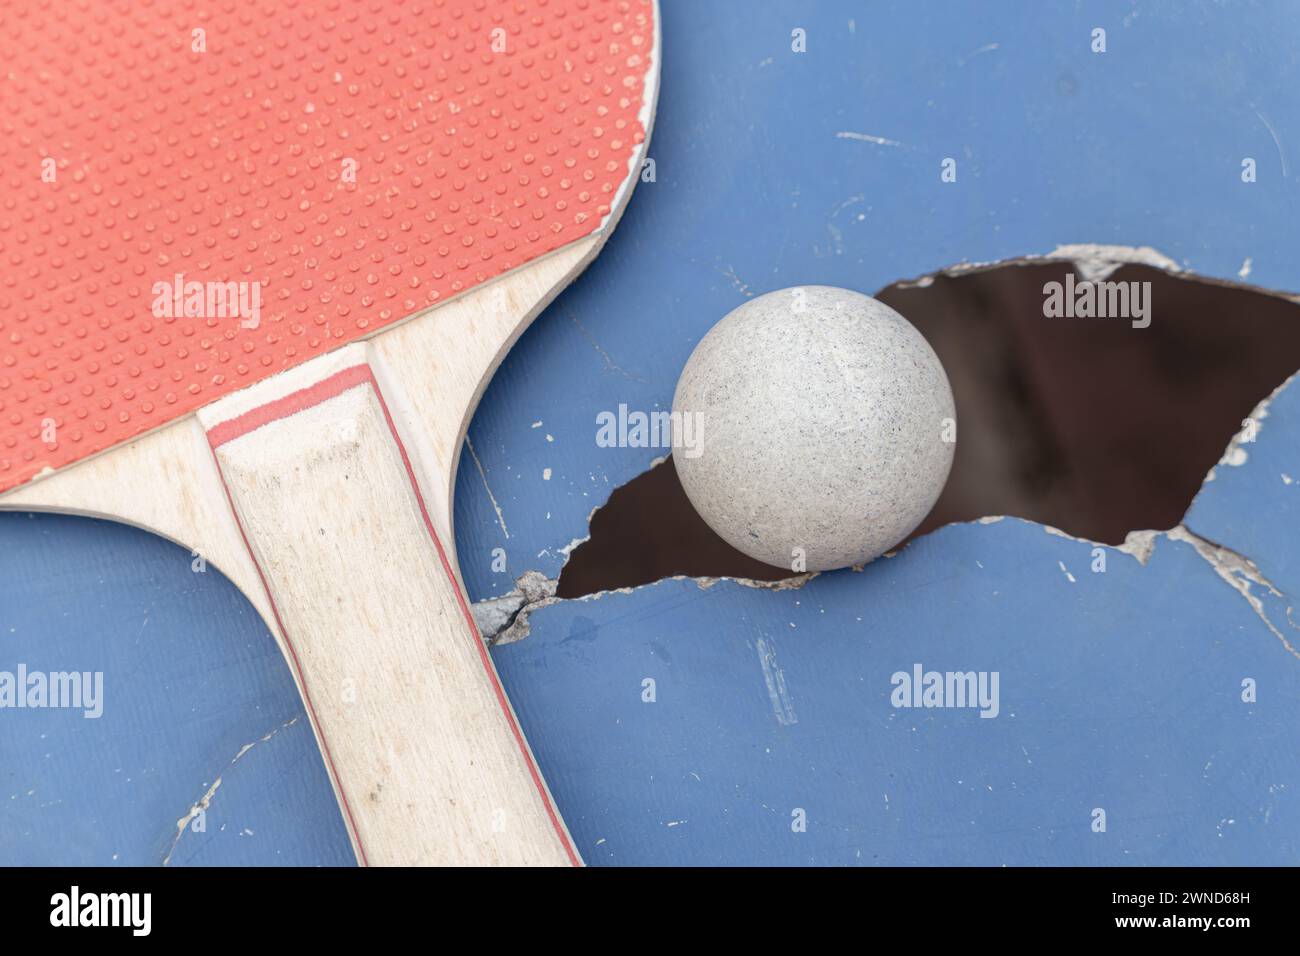 pingpong ball and racket on a damaged table at horizontal composition Stock Photo